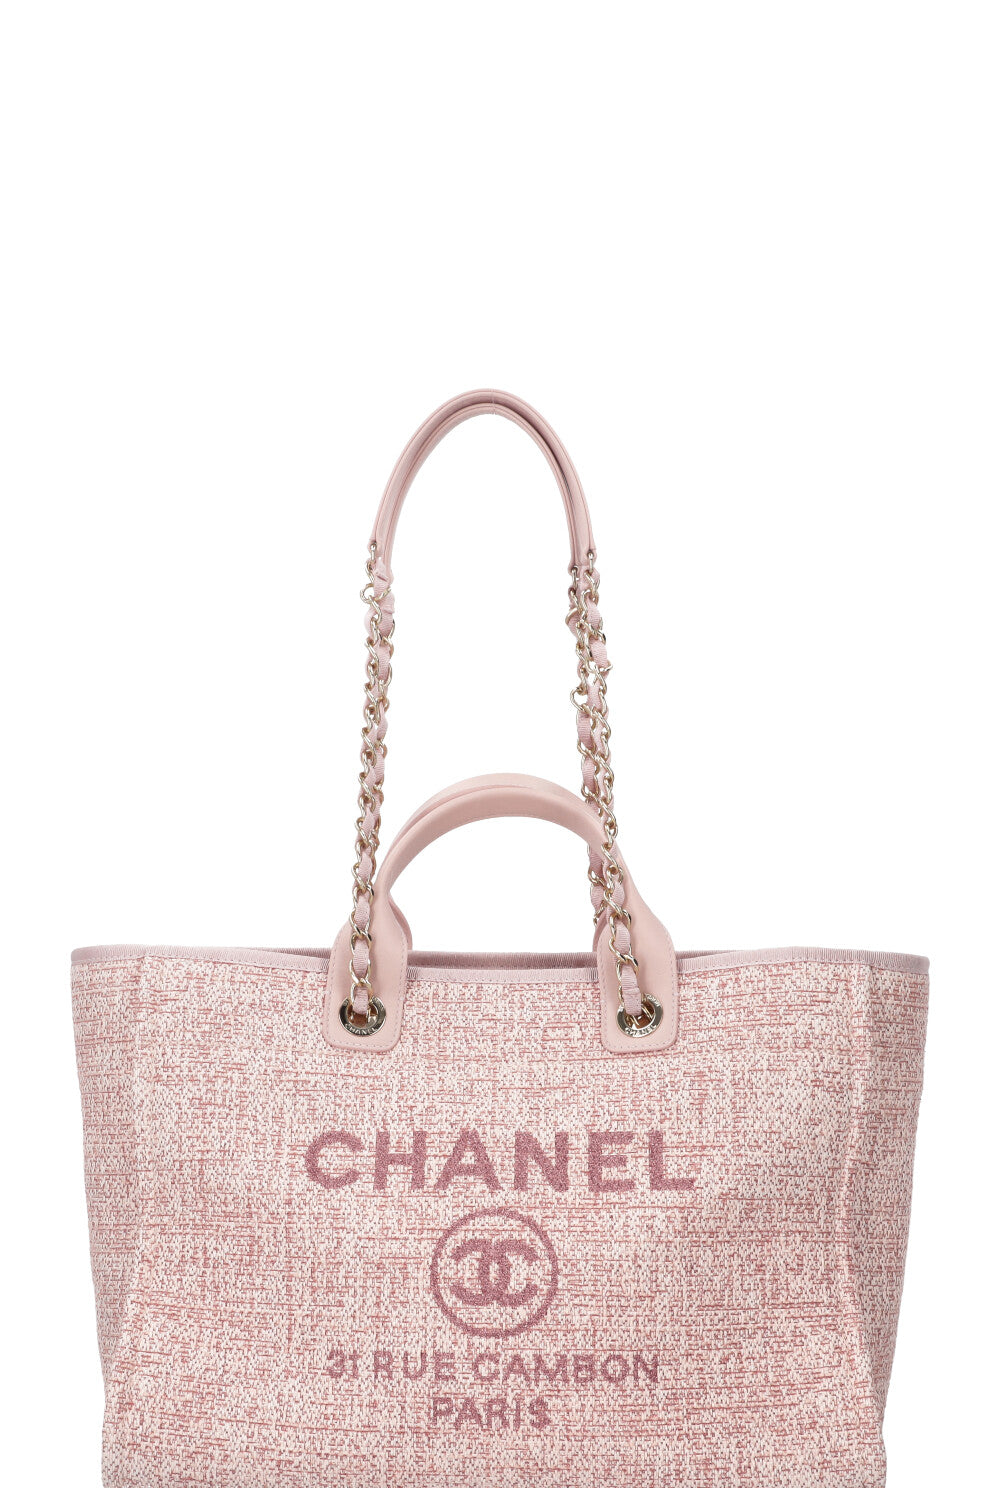 CHANEL Medium Deauville Tote Bag Pink